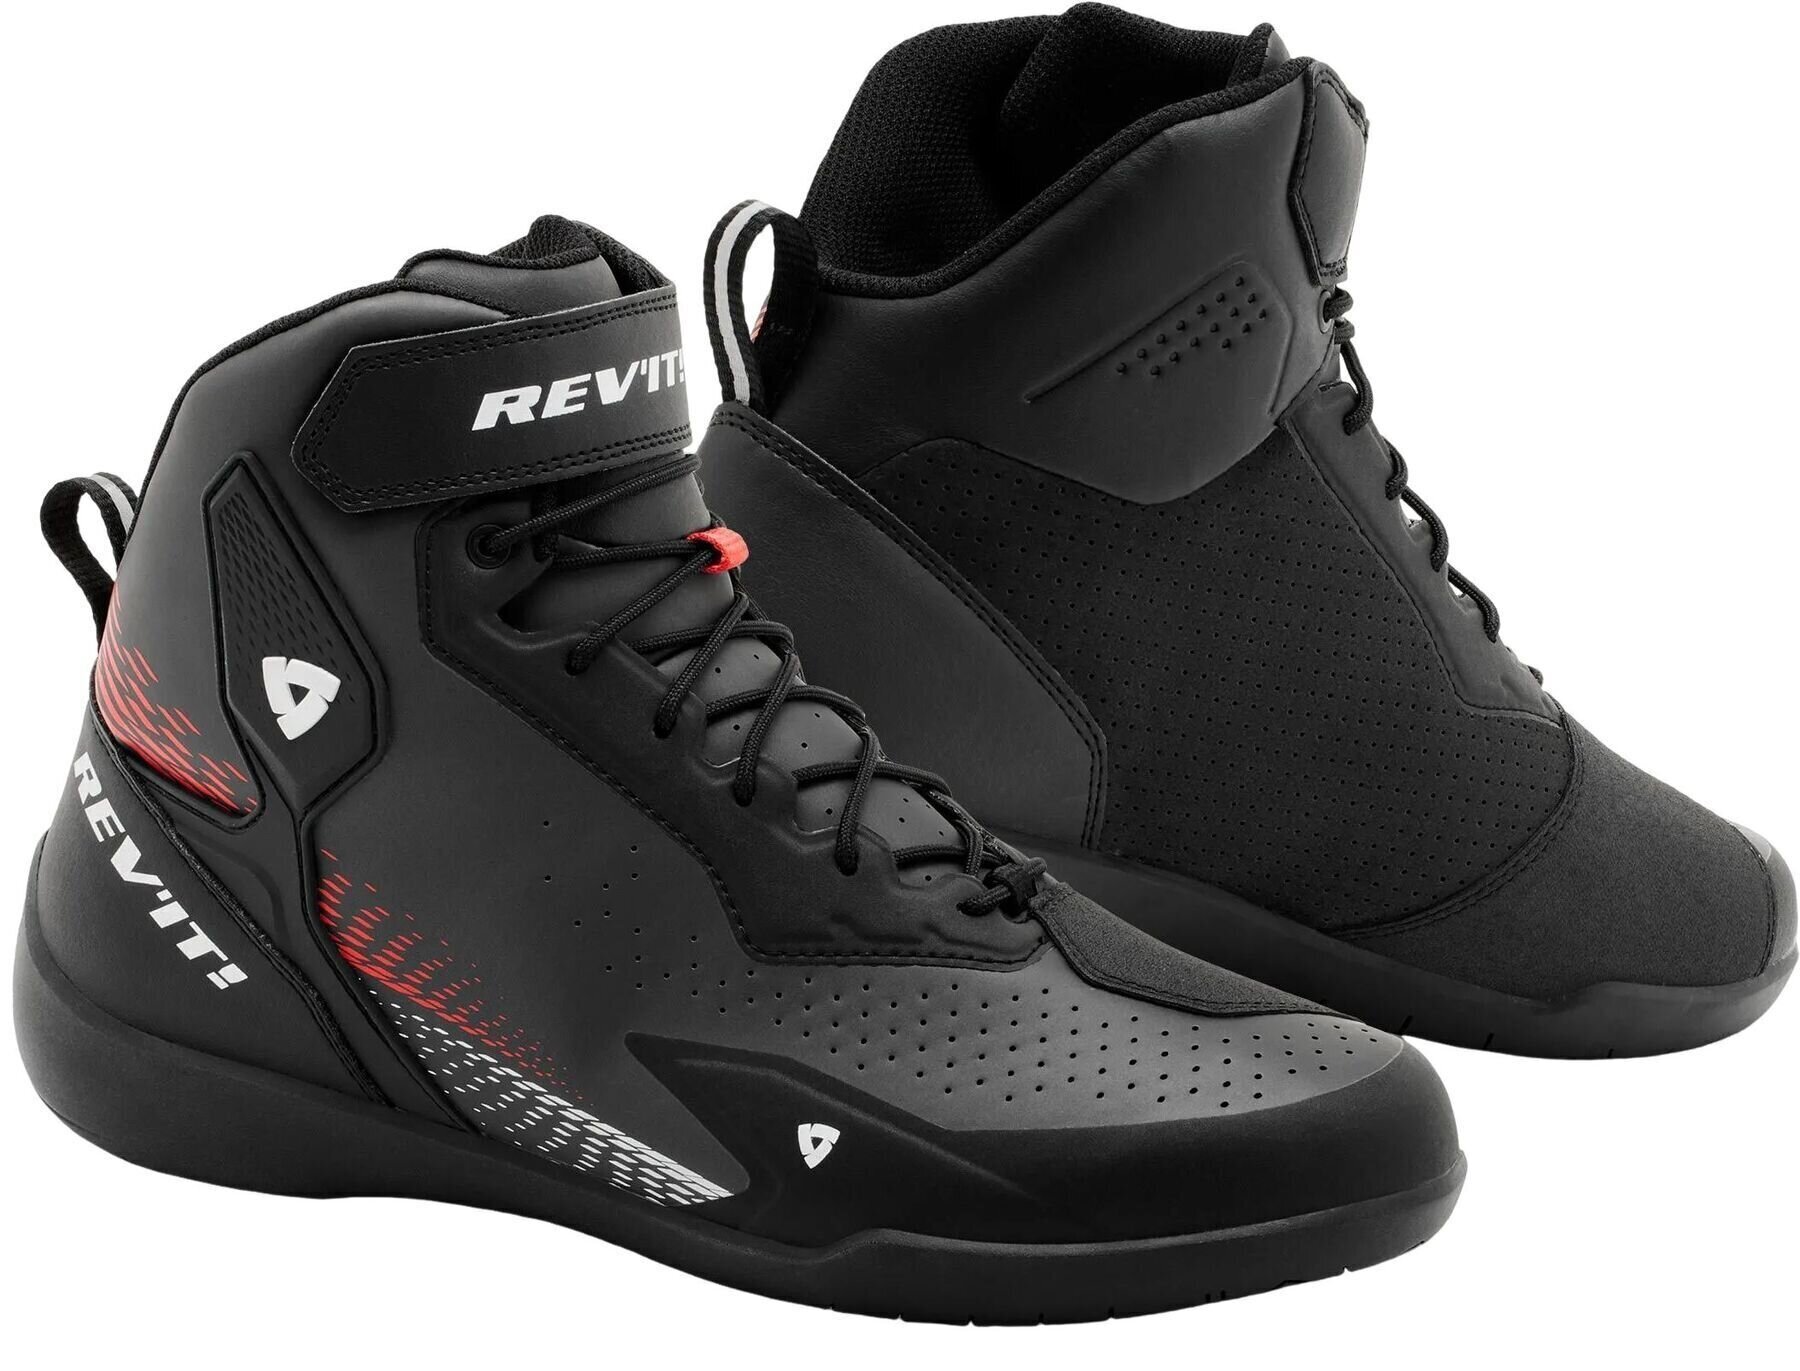 Motorcycle Boots Rev'it! Shoes G-Force 2 Black/Neon Red 46 Motorcycle Boots